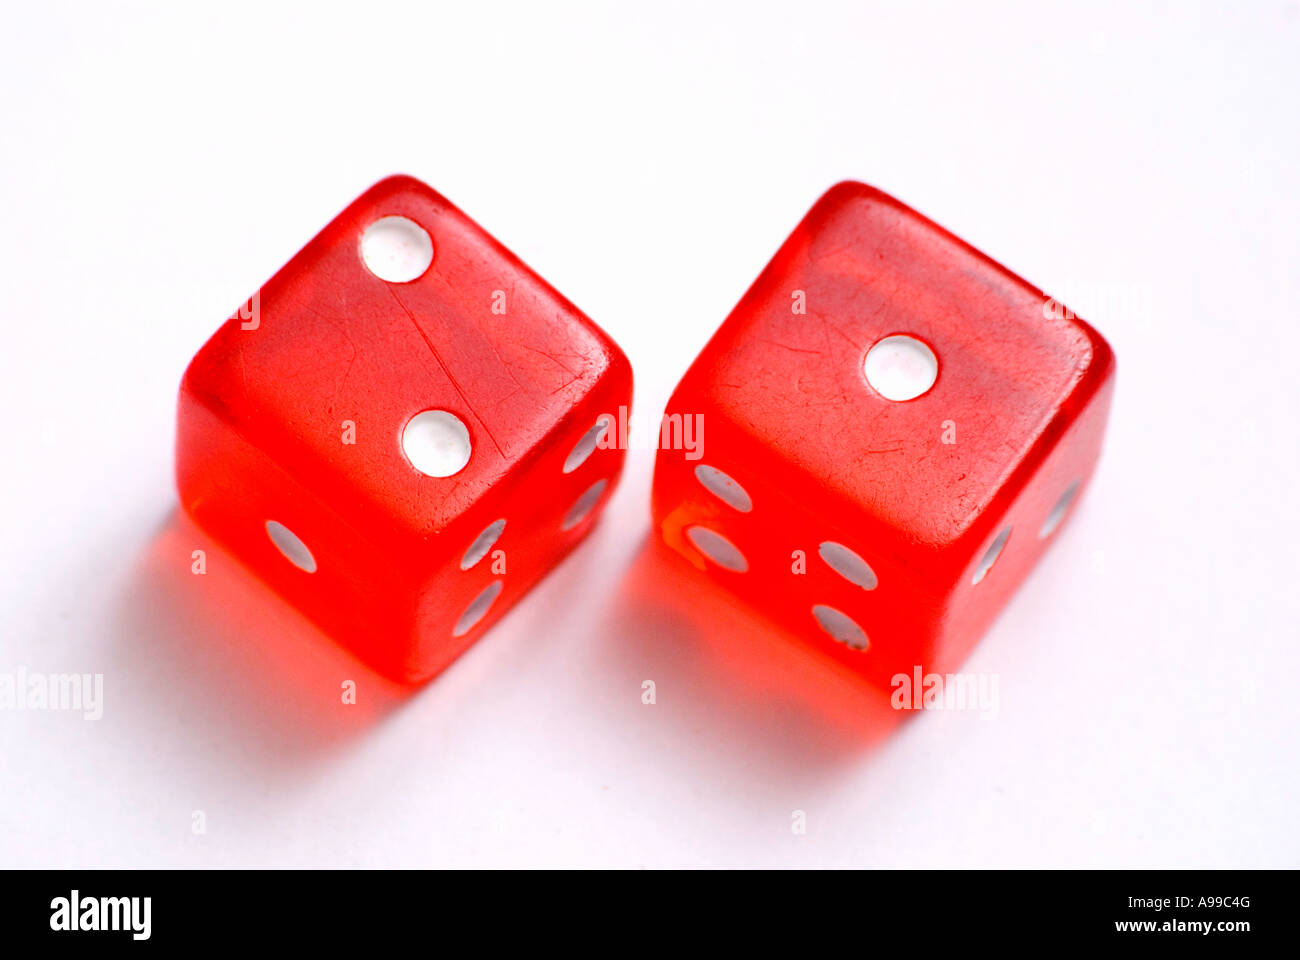 A red pair of dice on a white background Stock Photo